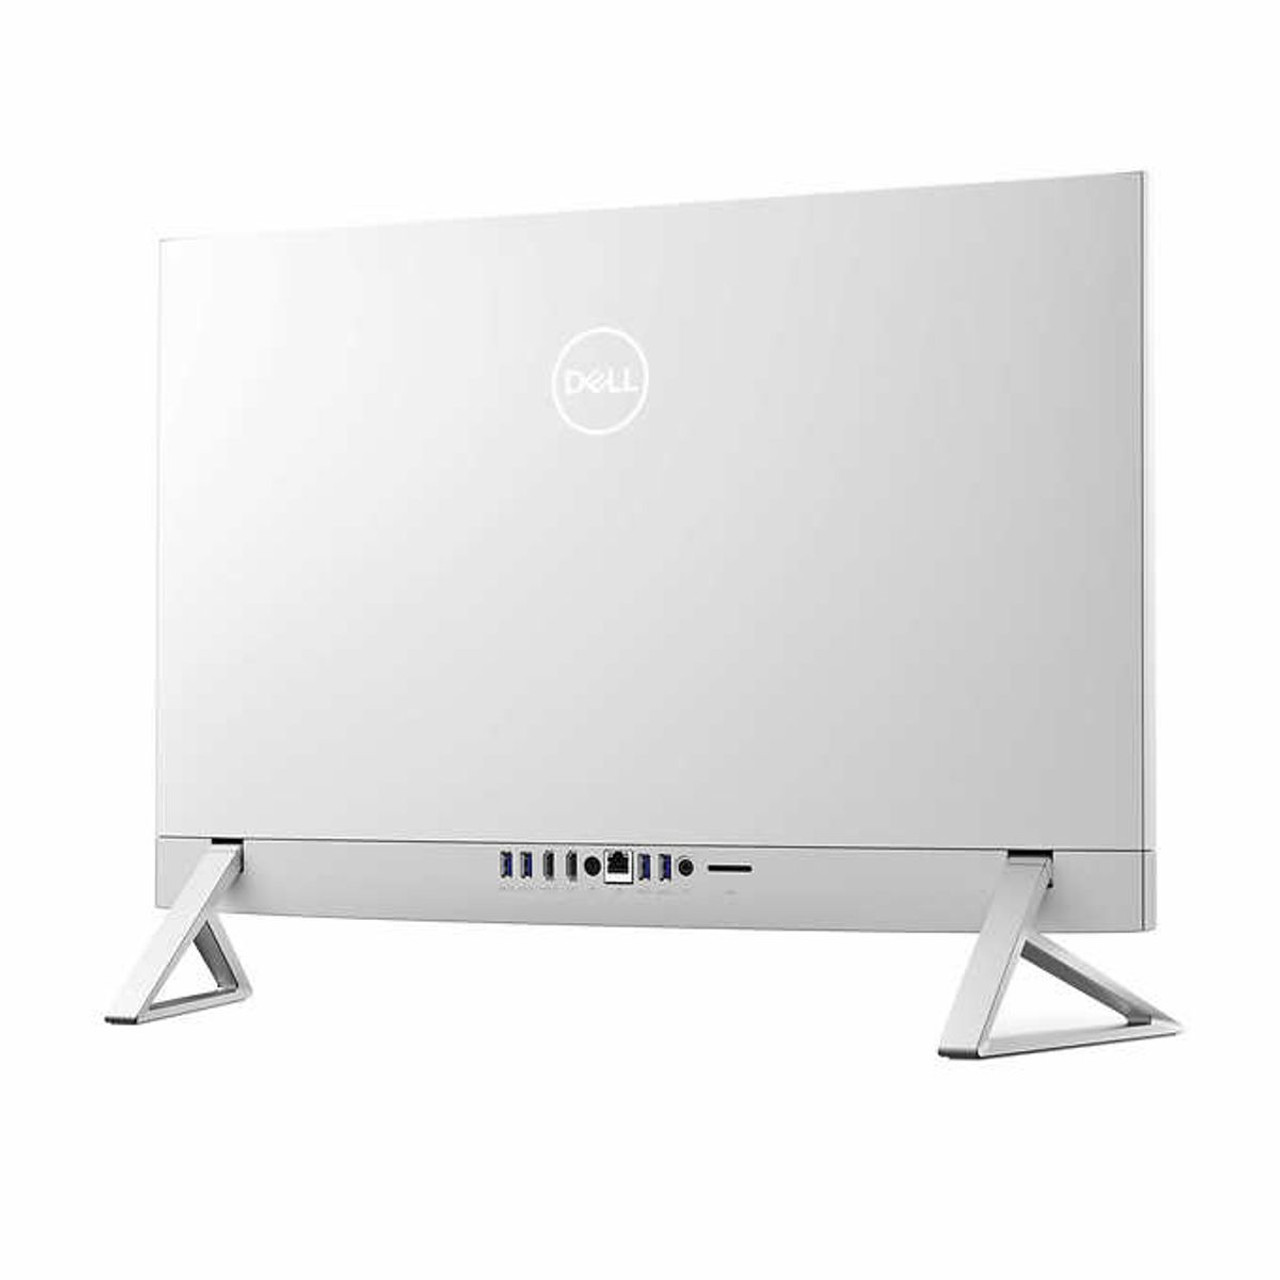 Dell® Inspiron 27 7720 All-in-One Desktop, 32GB RAM, 1TB SSD product image